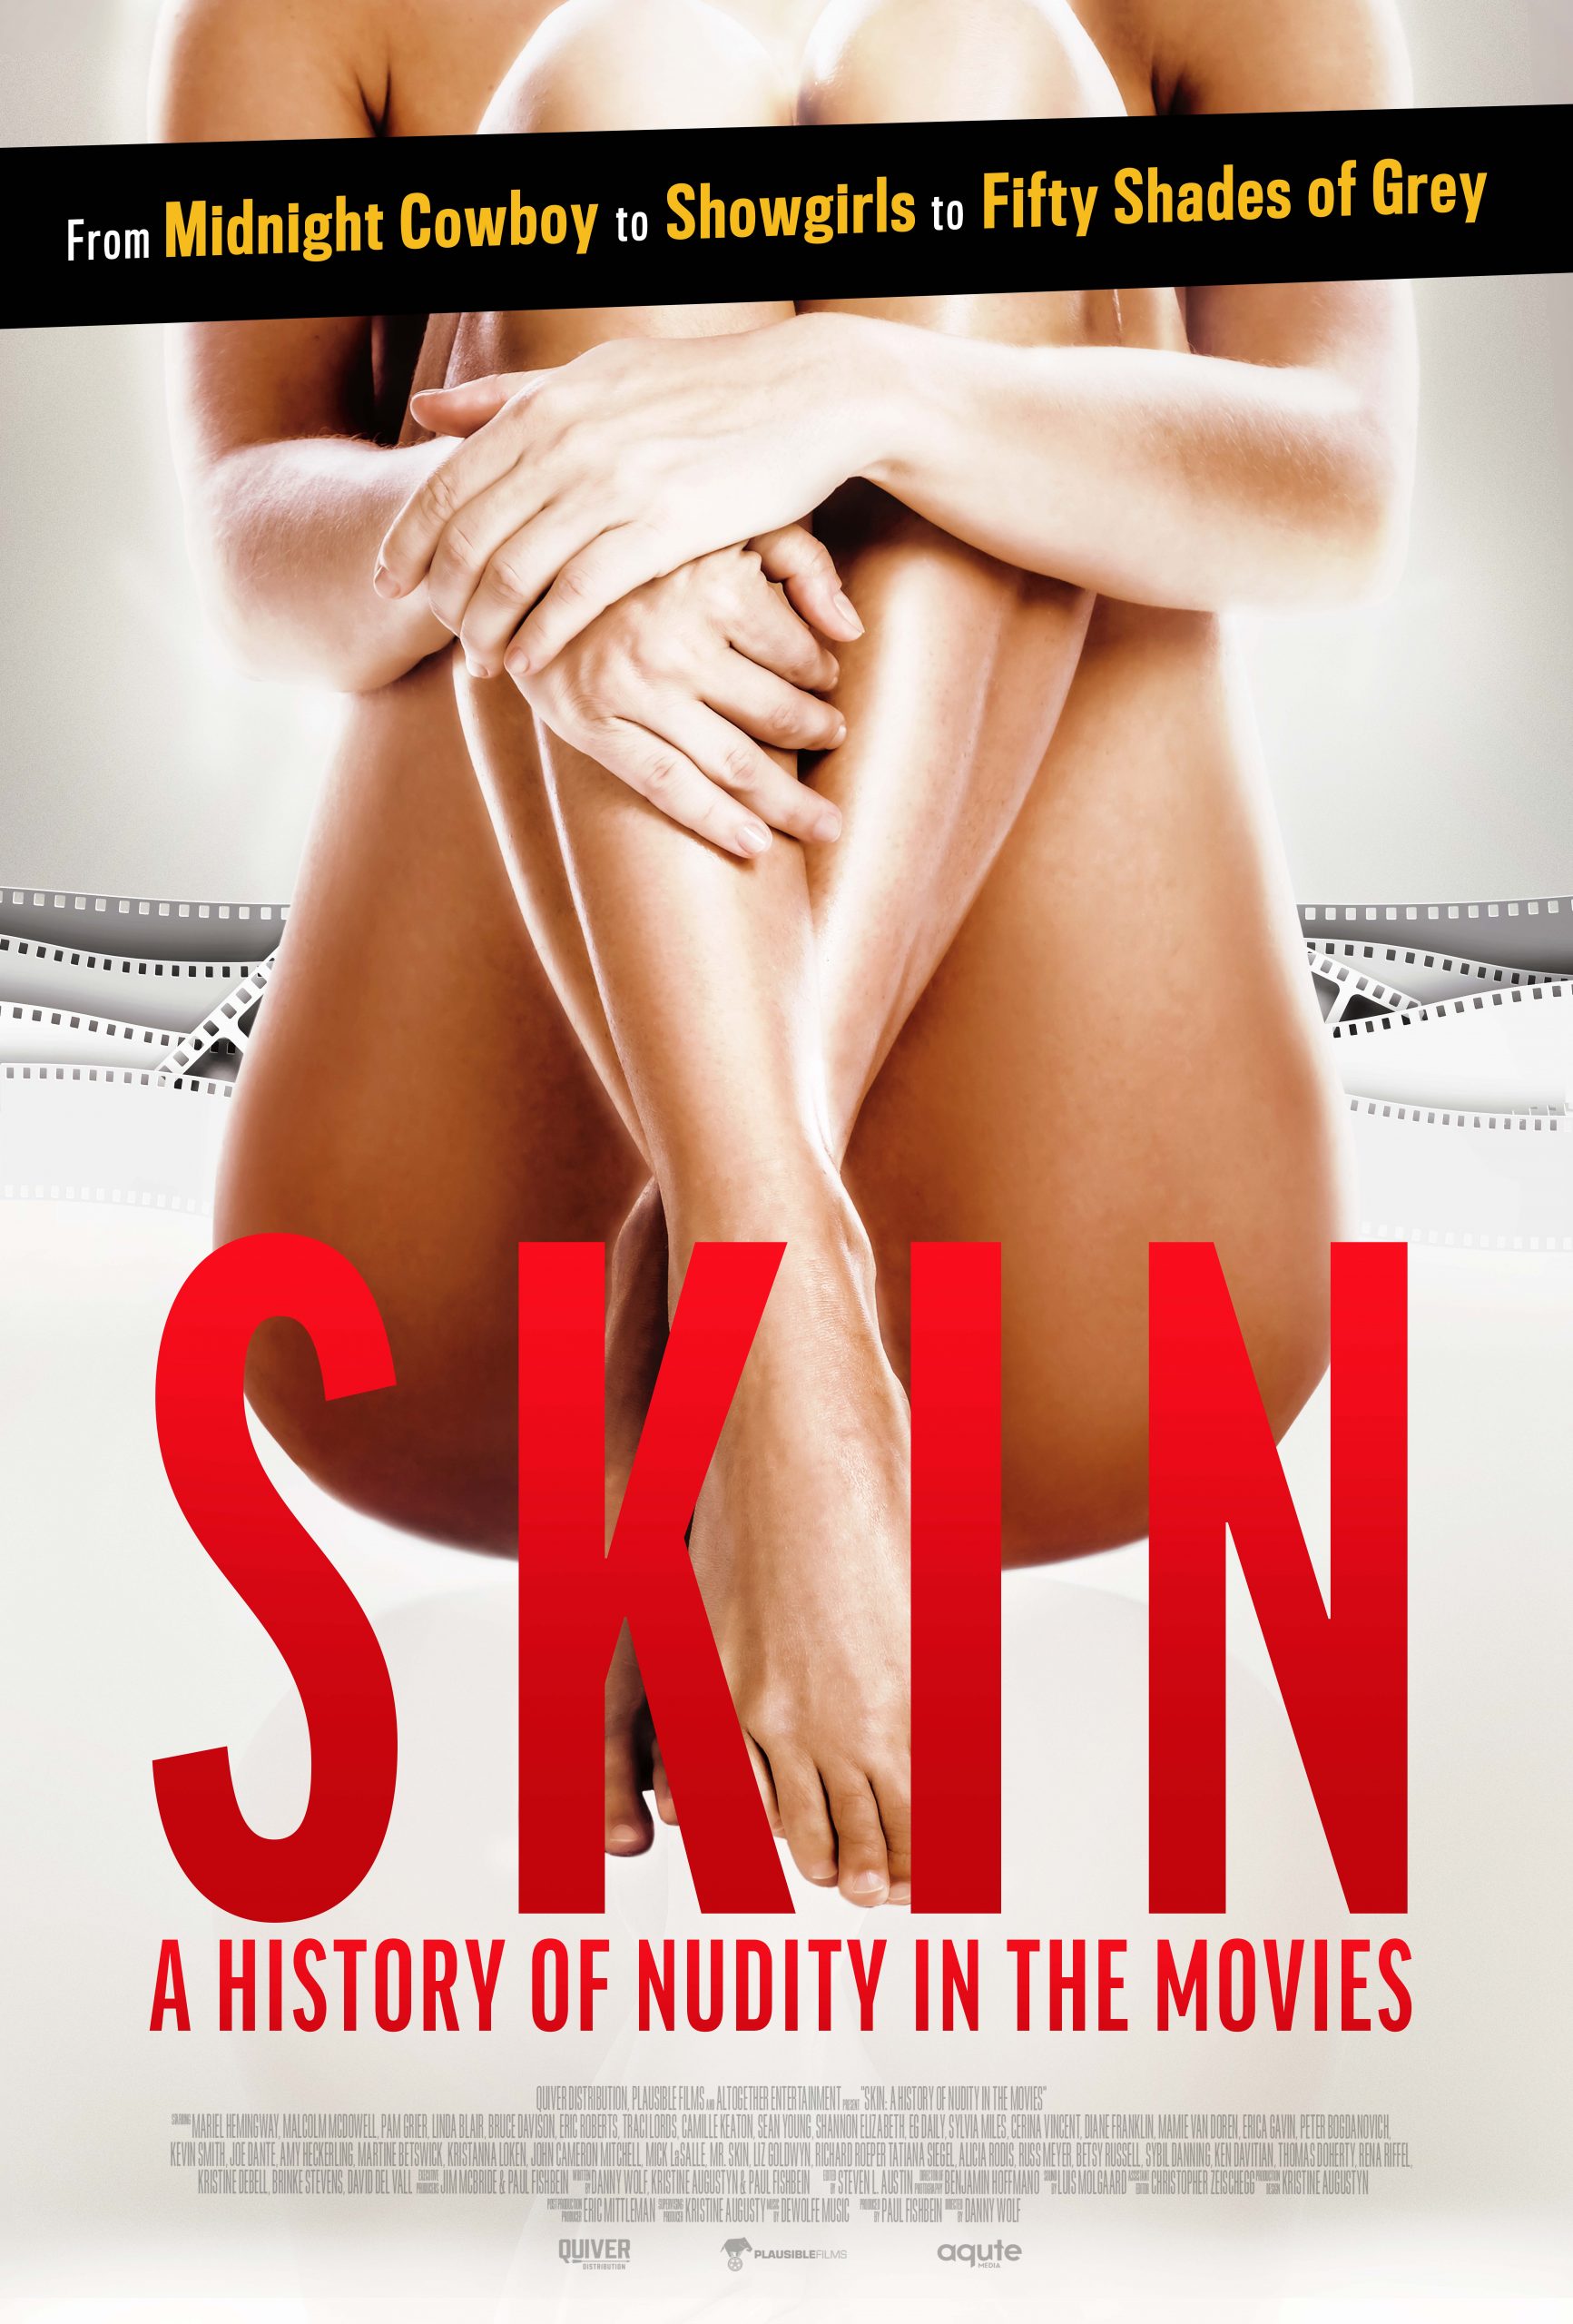 Behind The Making Of Skin: A History Of Nudity In The Movies [Exclusive Interview]